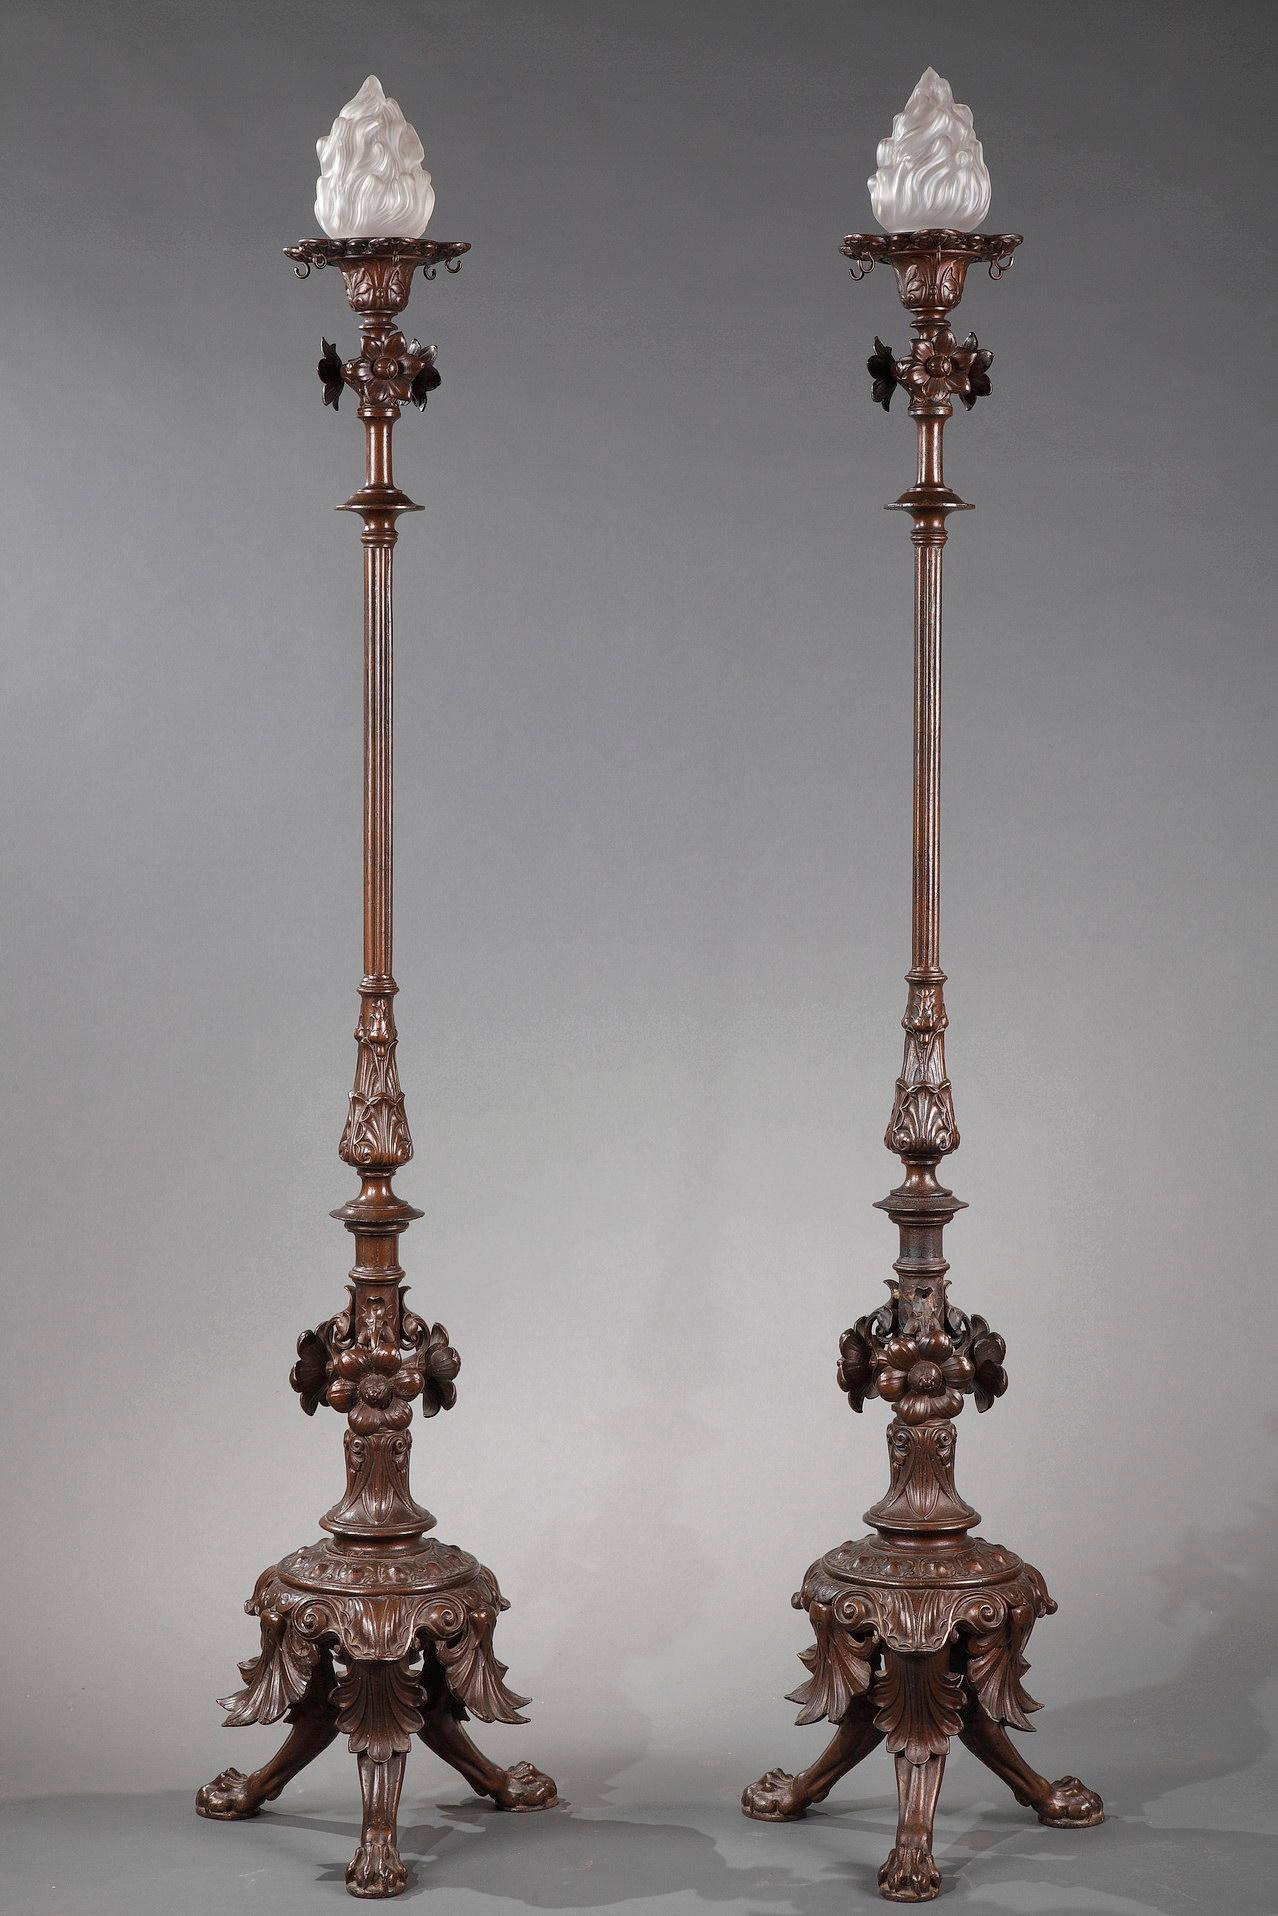 A fin pair of cast iron floor lamps, toped by a flame-shaped light, and adorned with a vegetal decoration made of flowers and leaves, ending with a base composed of three lion paws.